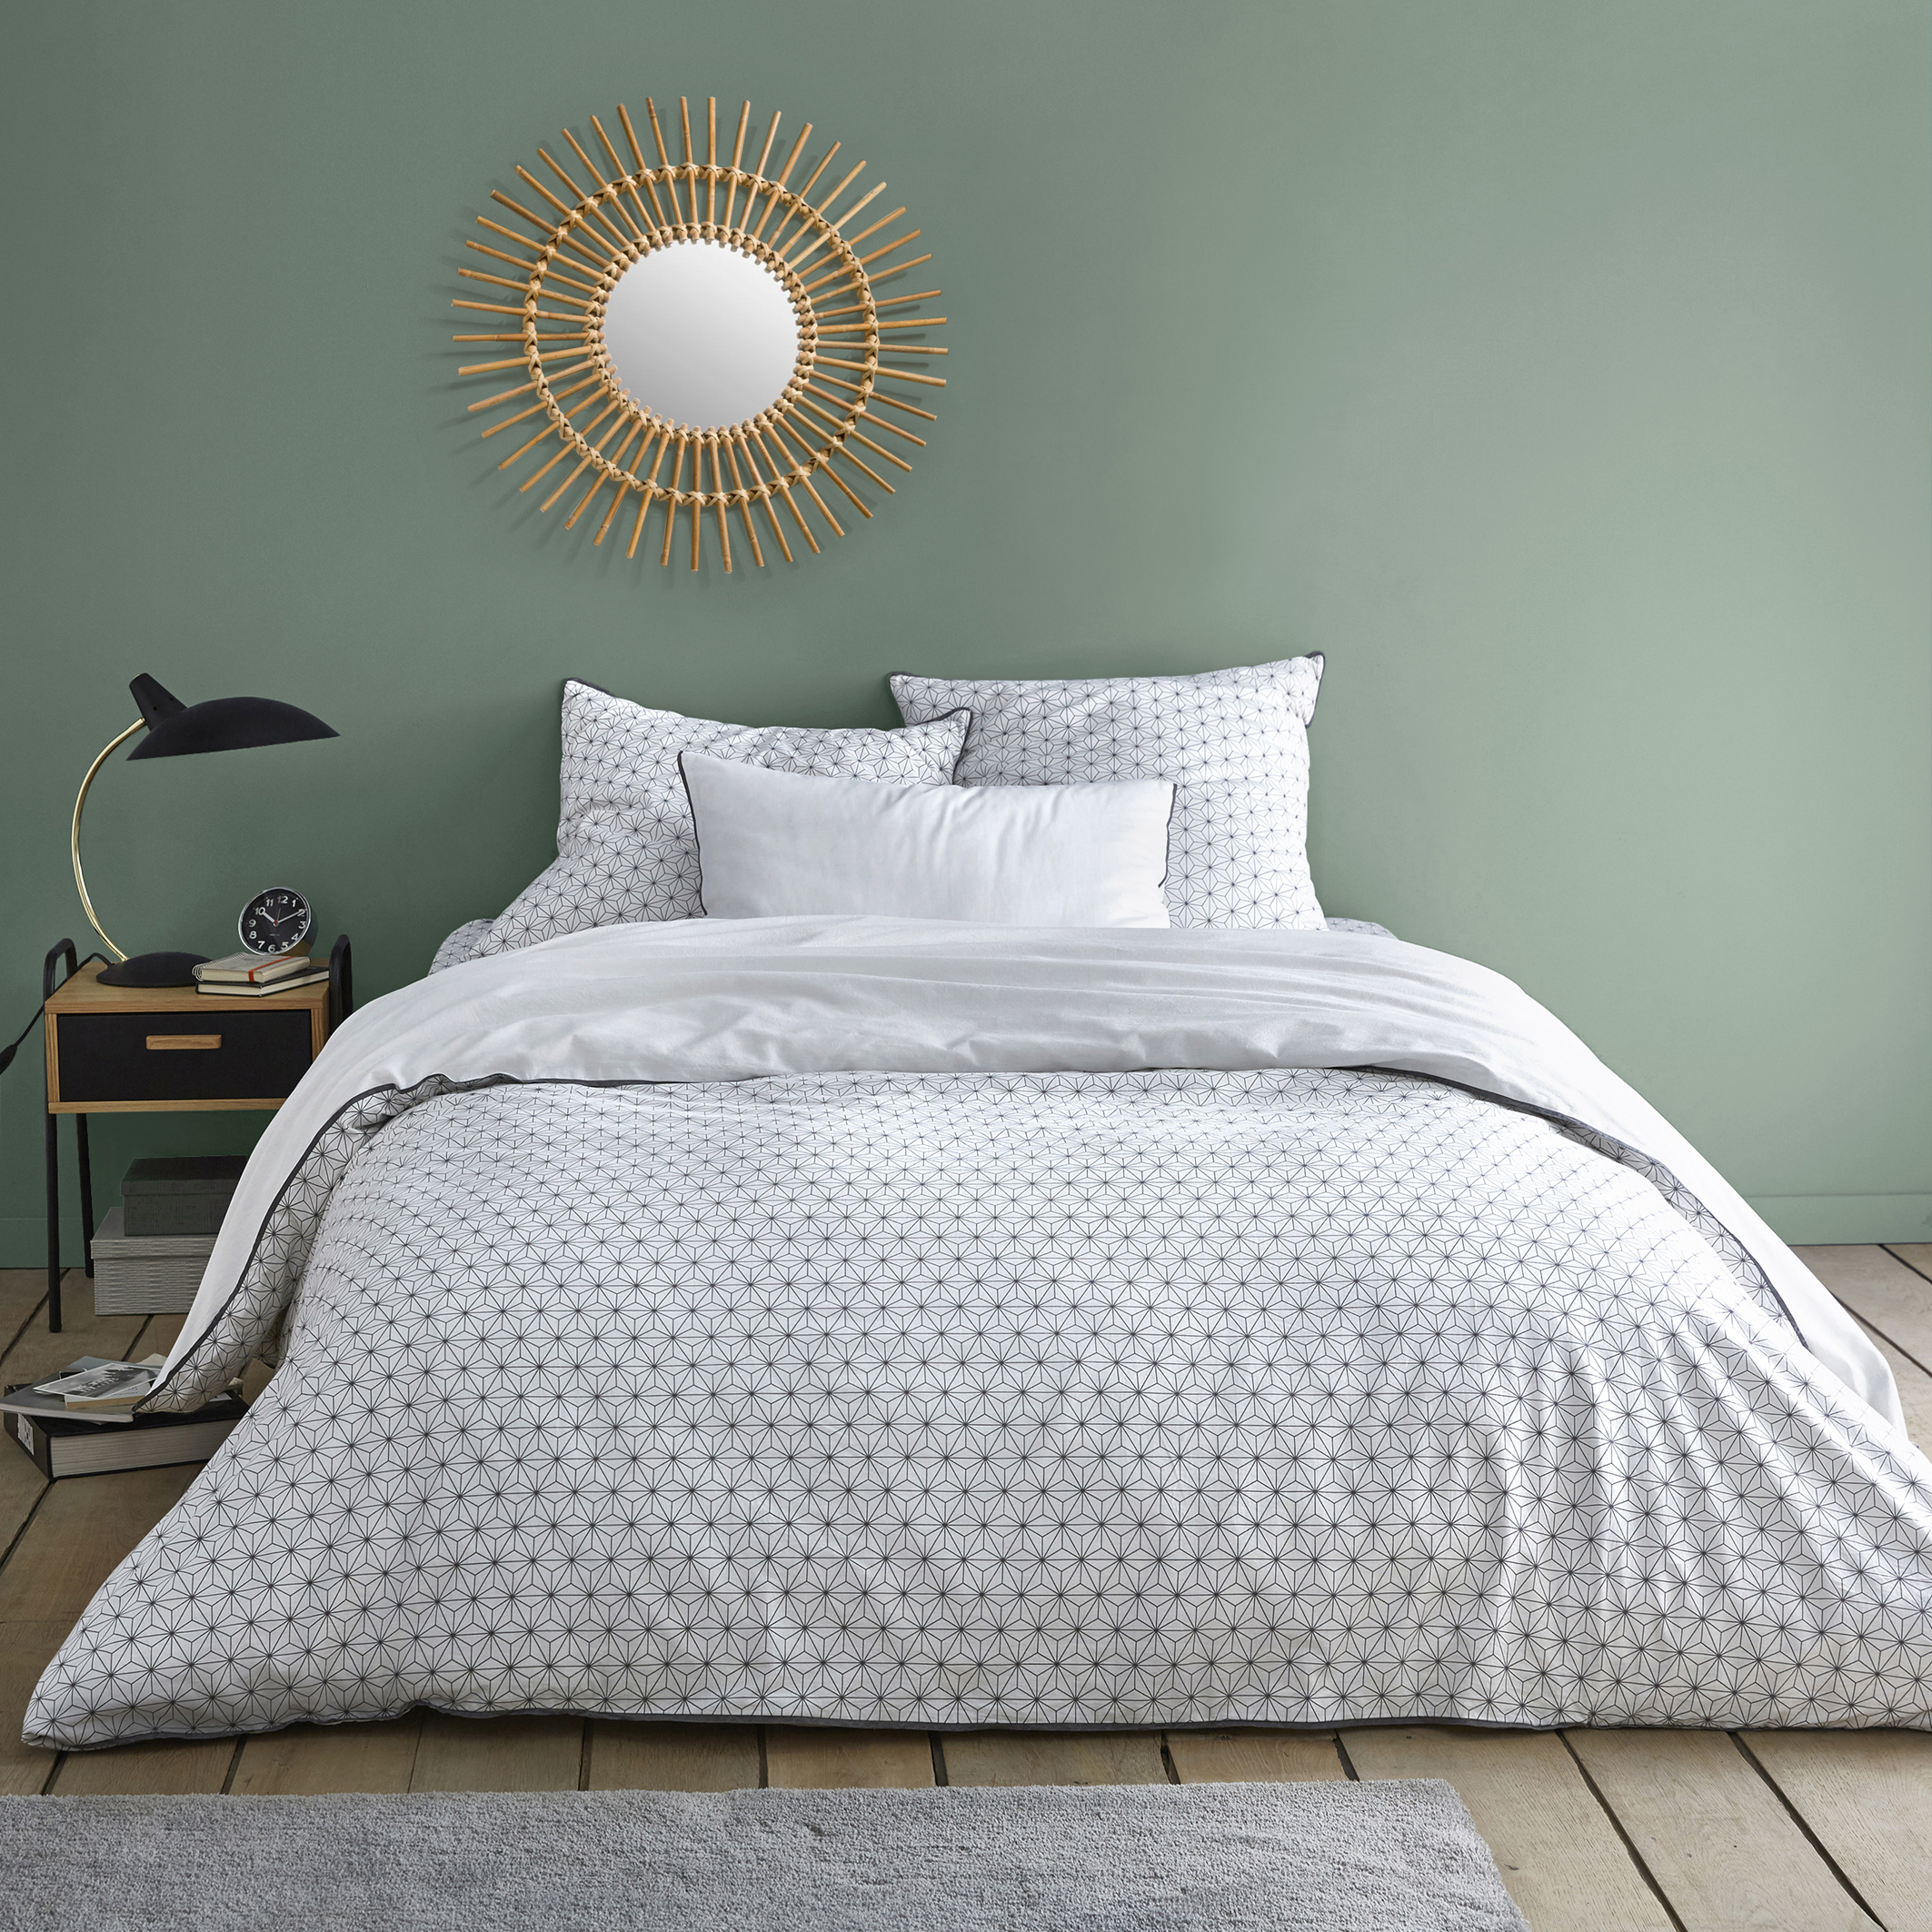 Nordic Geometric Cotton Duvet Cover, What Is The Measurement Of A Queen Duvet Cover